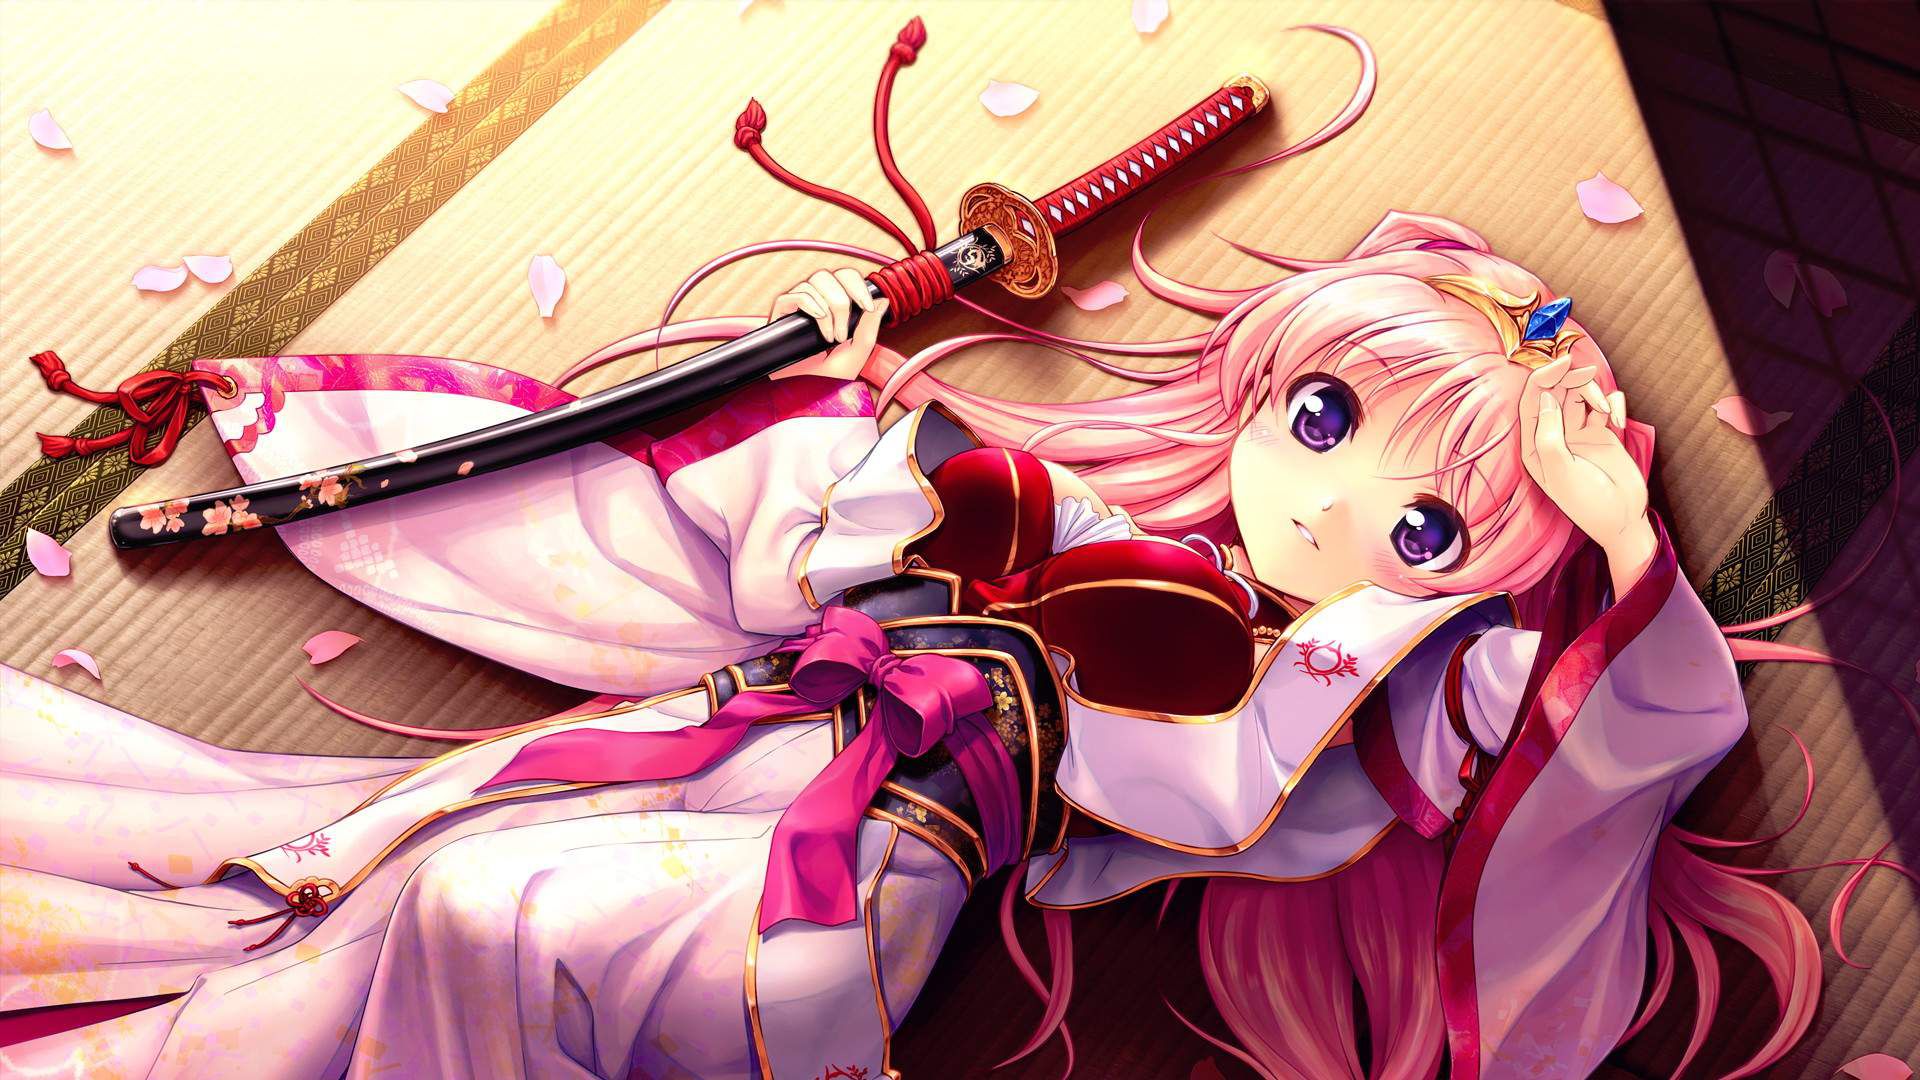 Kill if you drop in!? Beautiful girl swordsman or female warrior's chot dangerous and dignified moe image armed with a sword [pick-up] 48